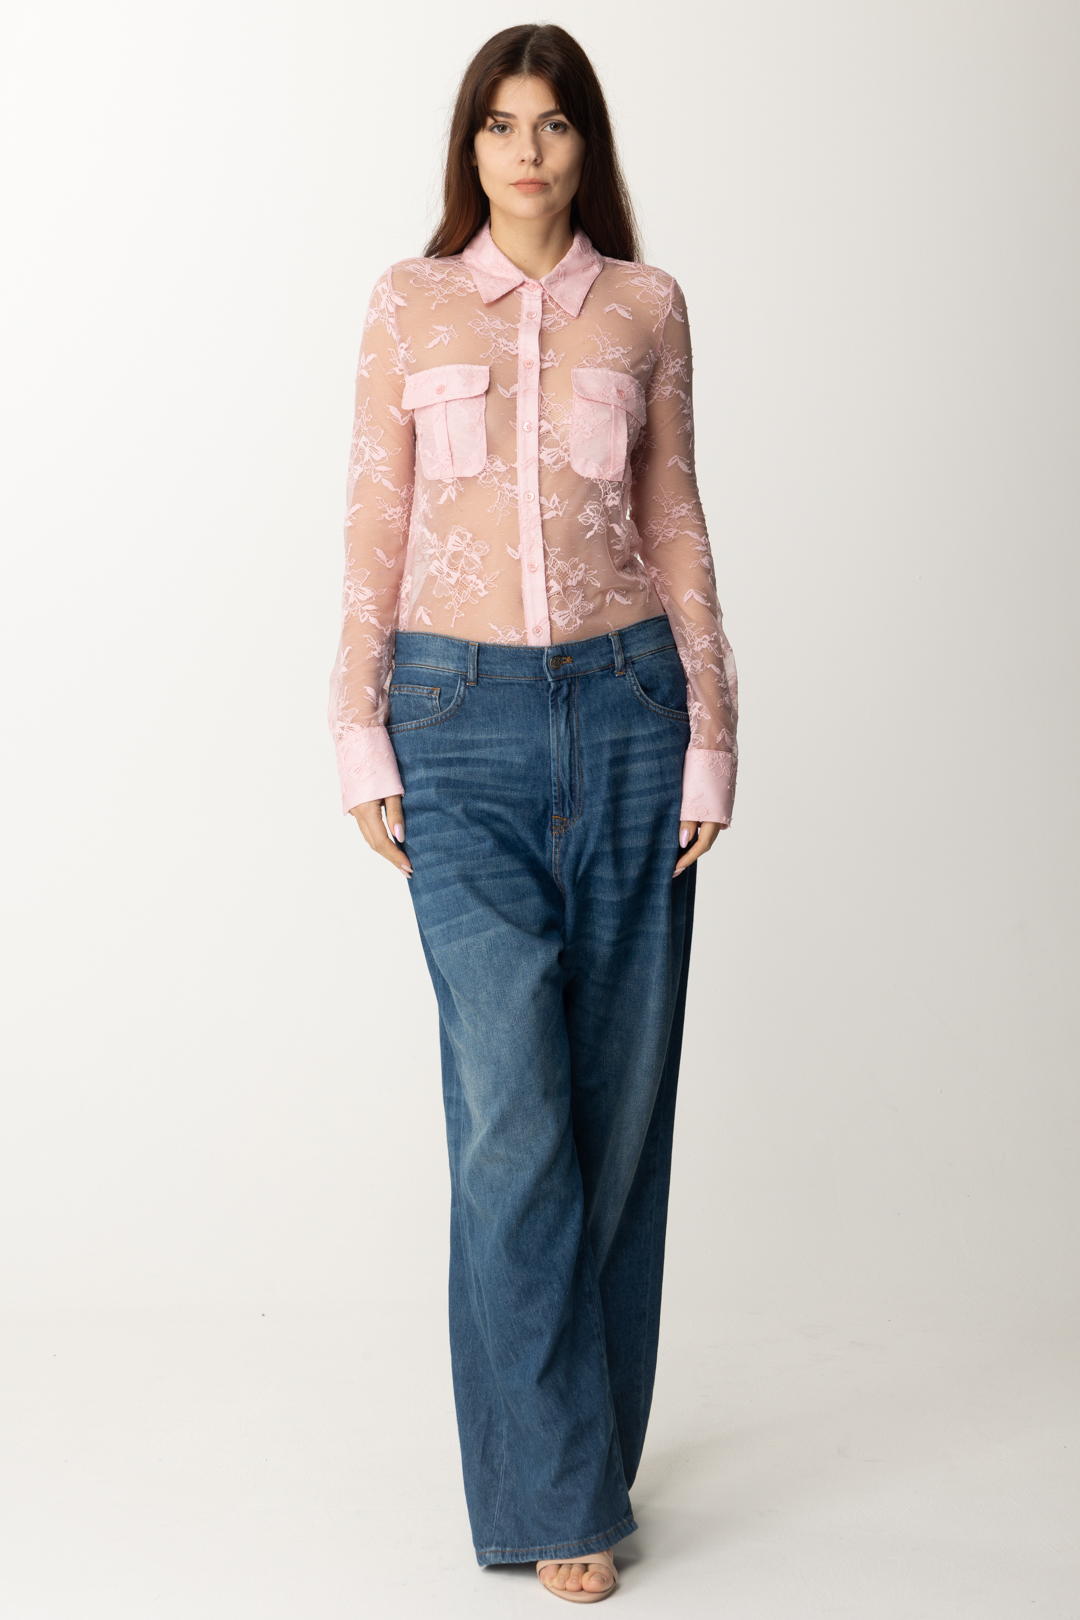 Preview: Aniye By "Lacy" Lace shirt Pink